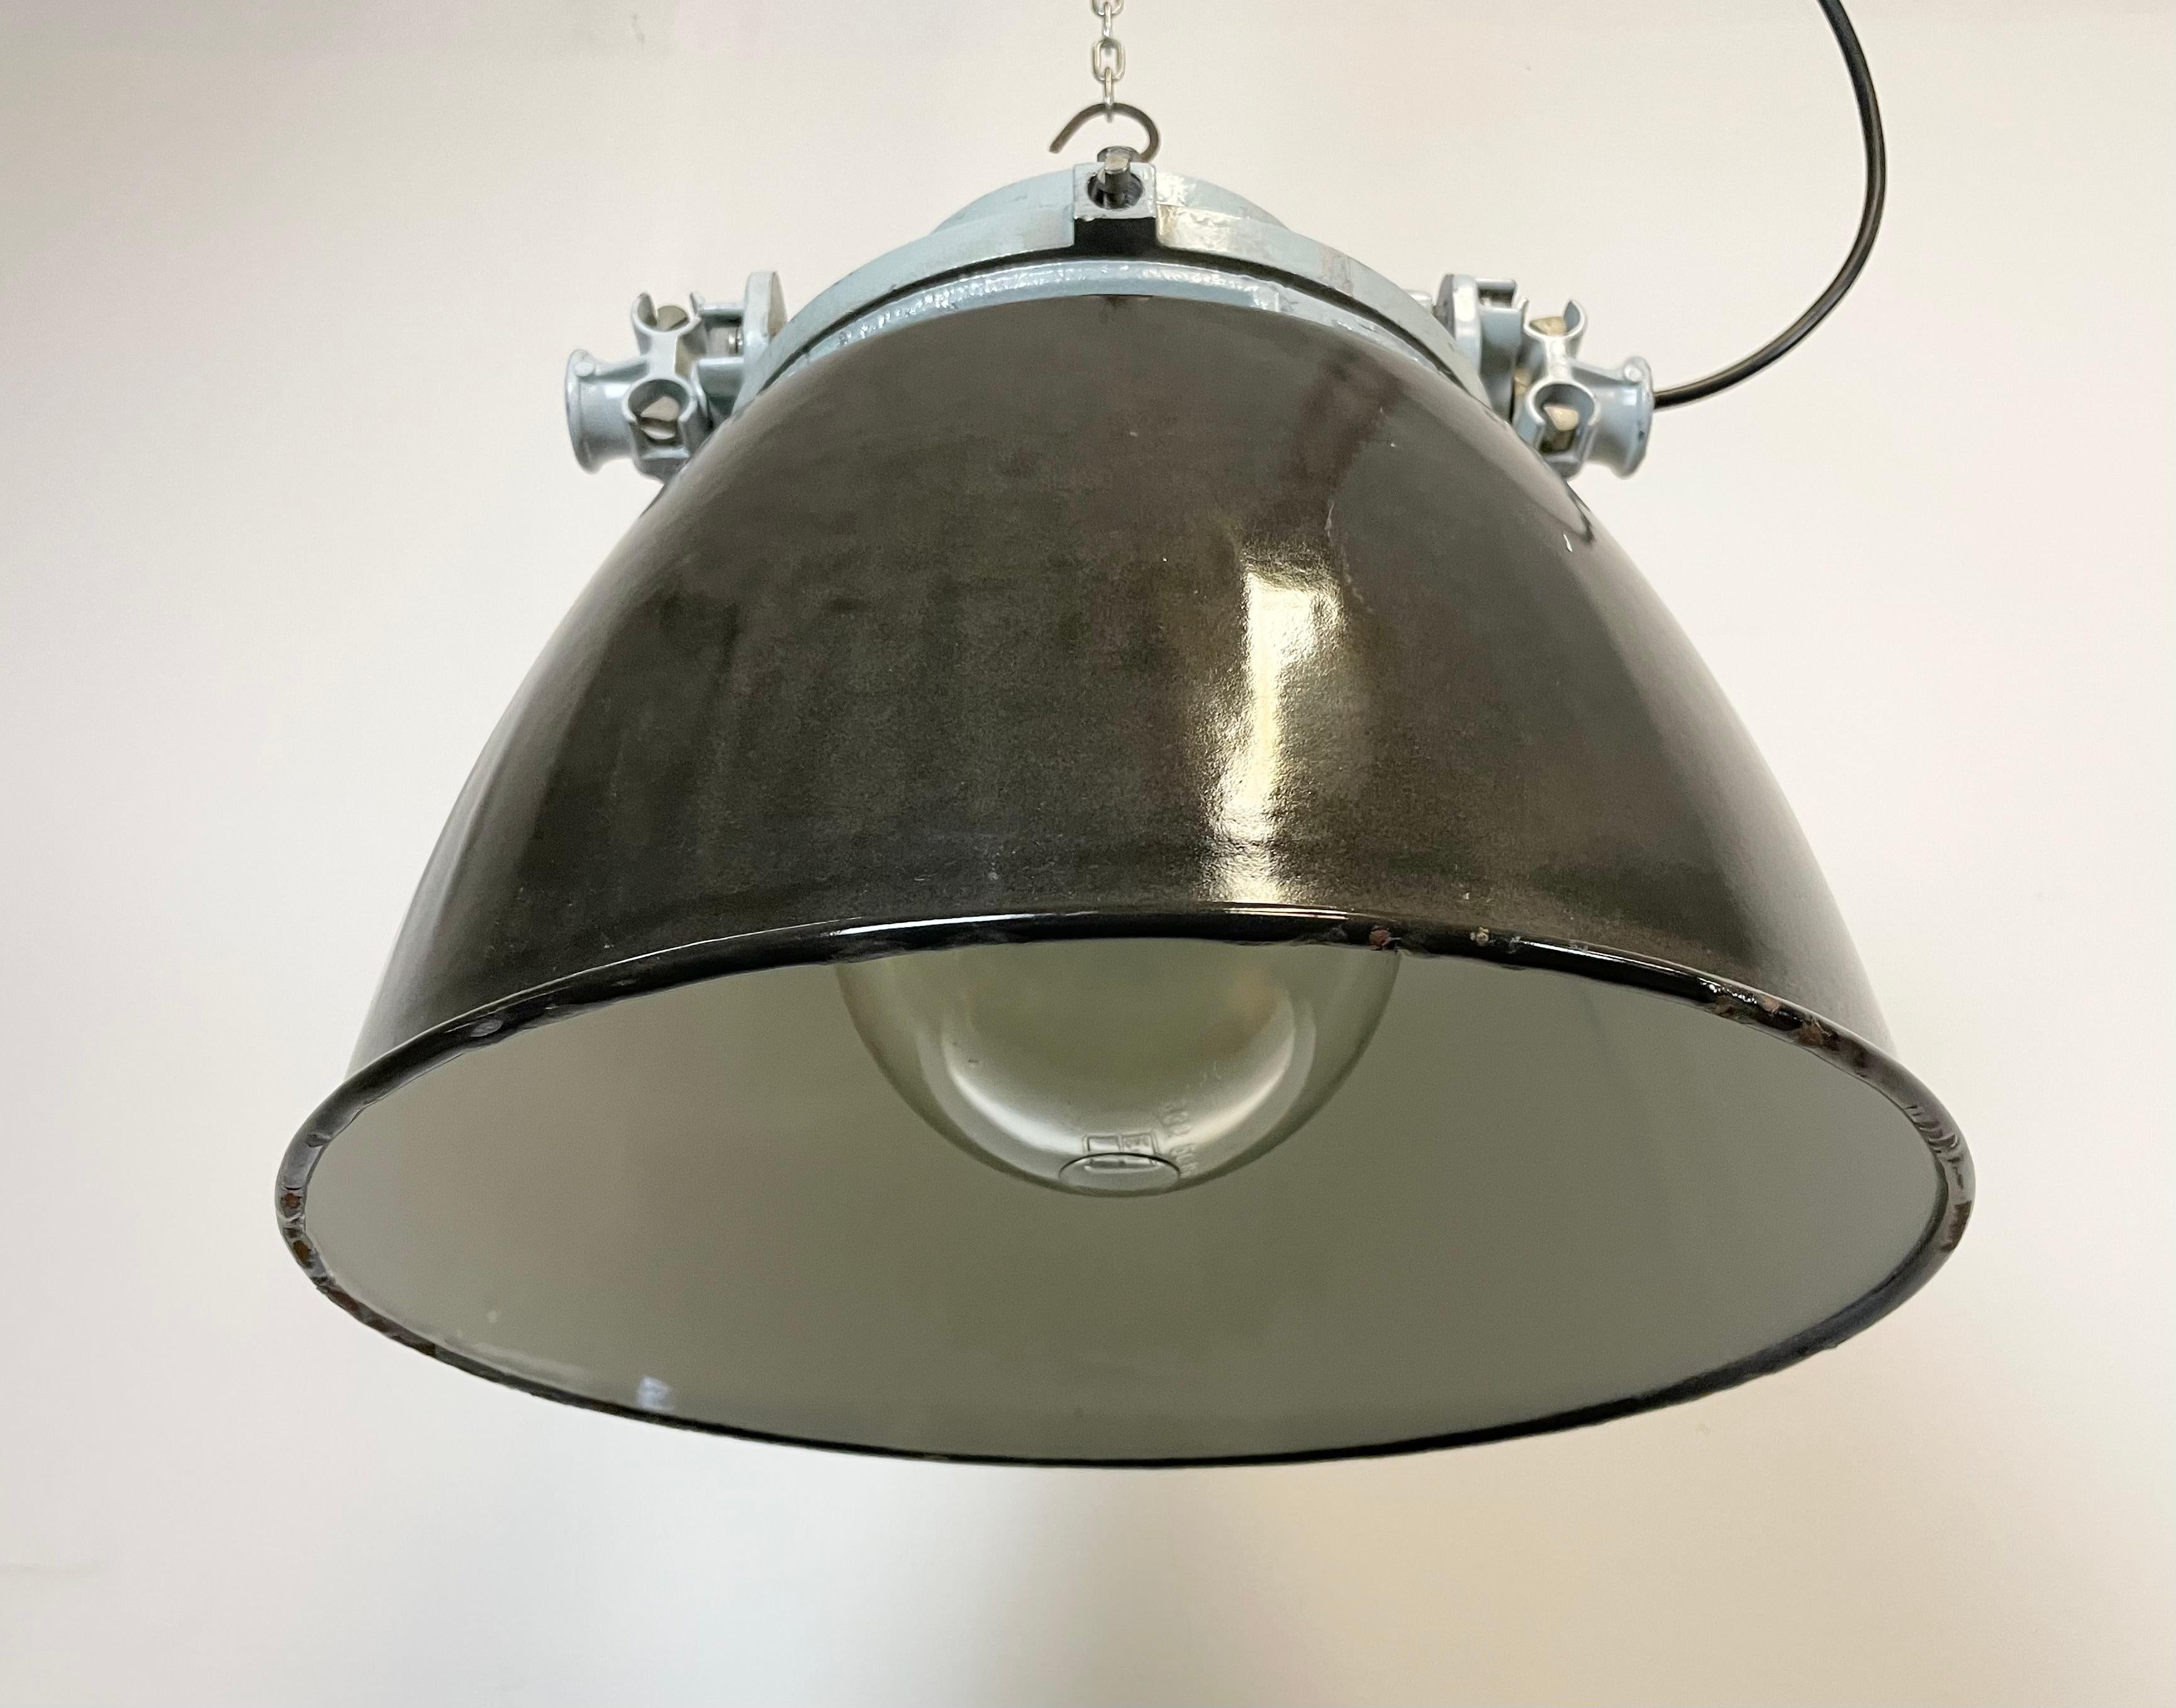 Grey Explosion Proof Lamp with Black Enameled Shade, 1970s In Good Condition For Sale In Kojetice, CZ